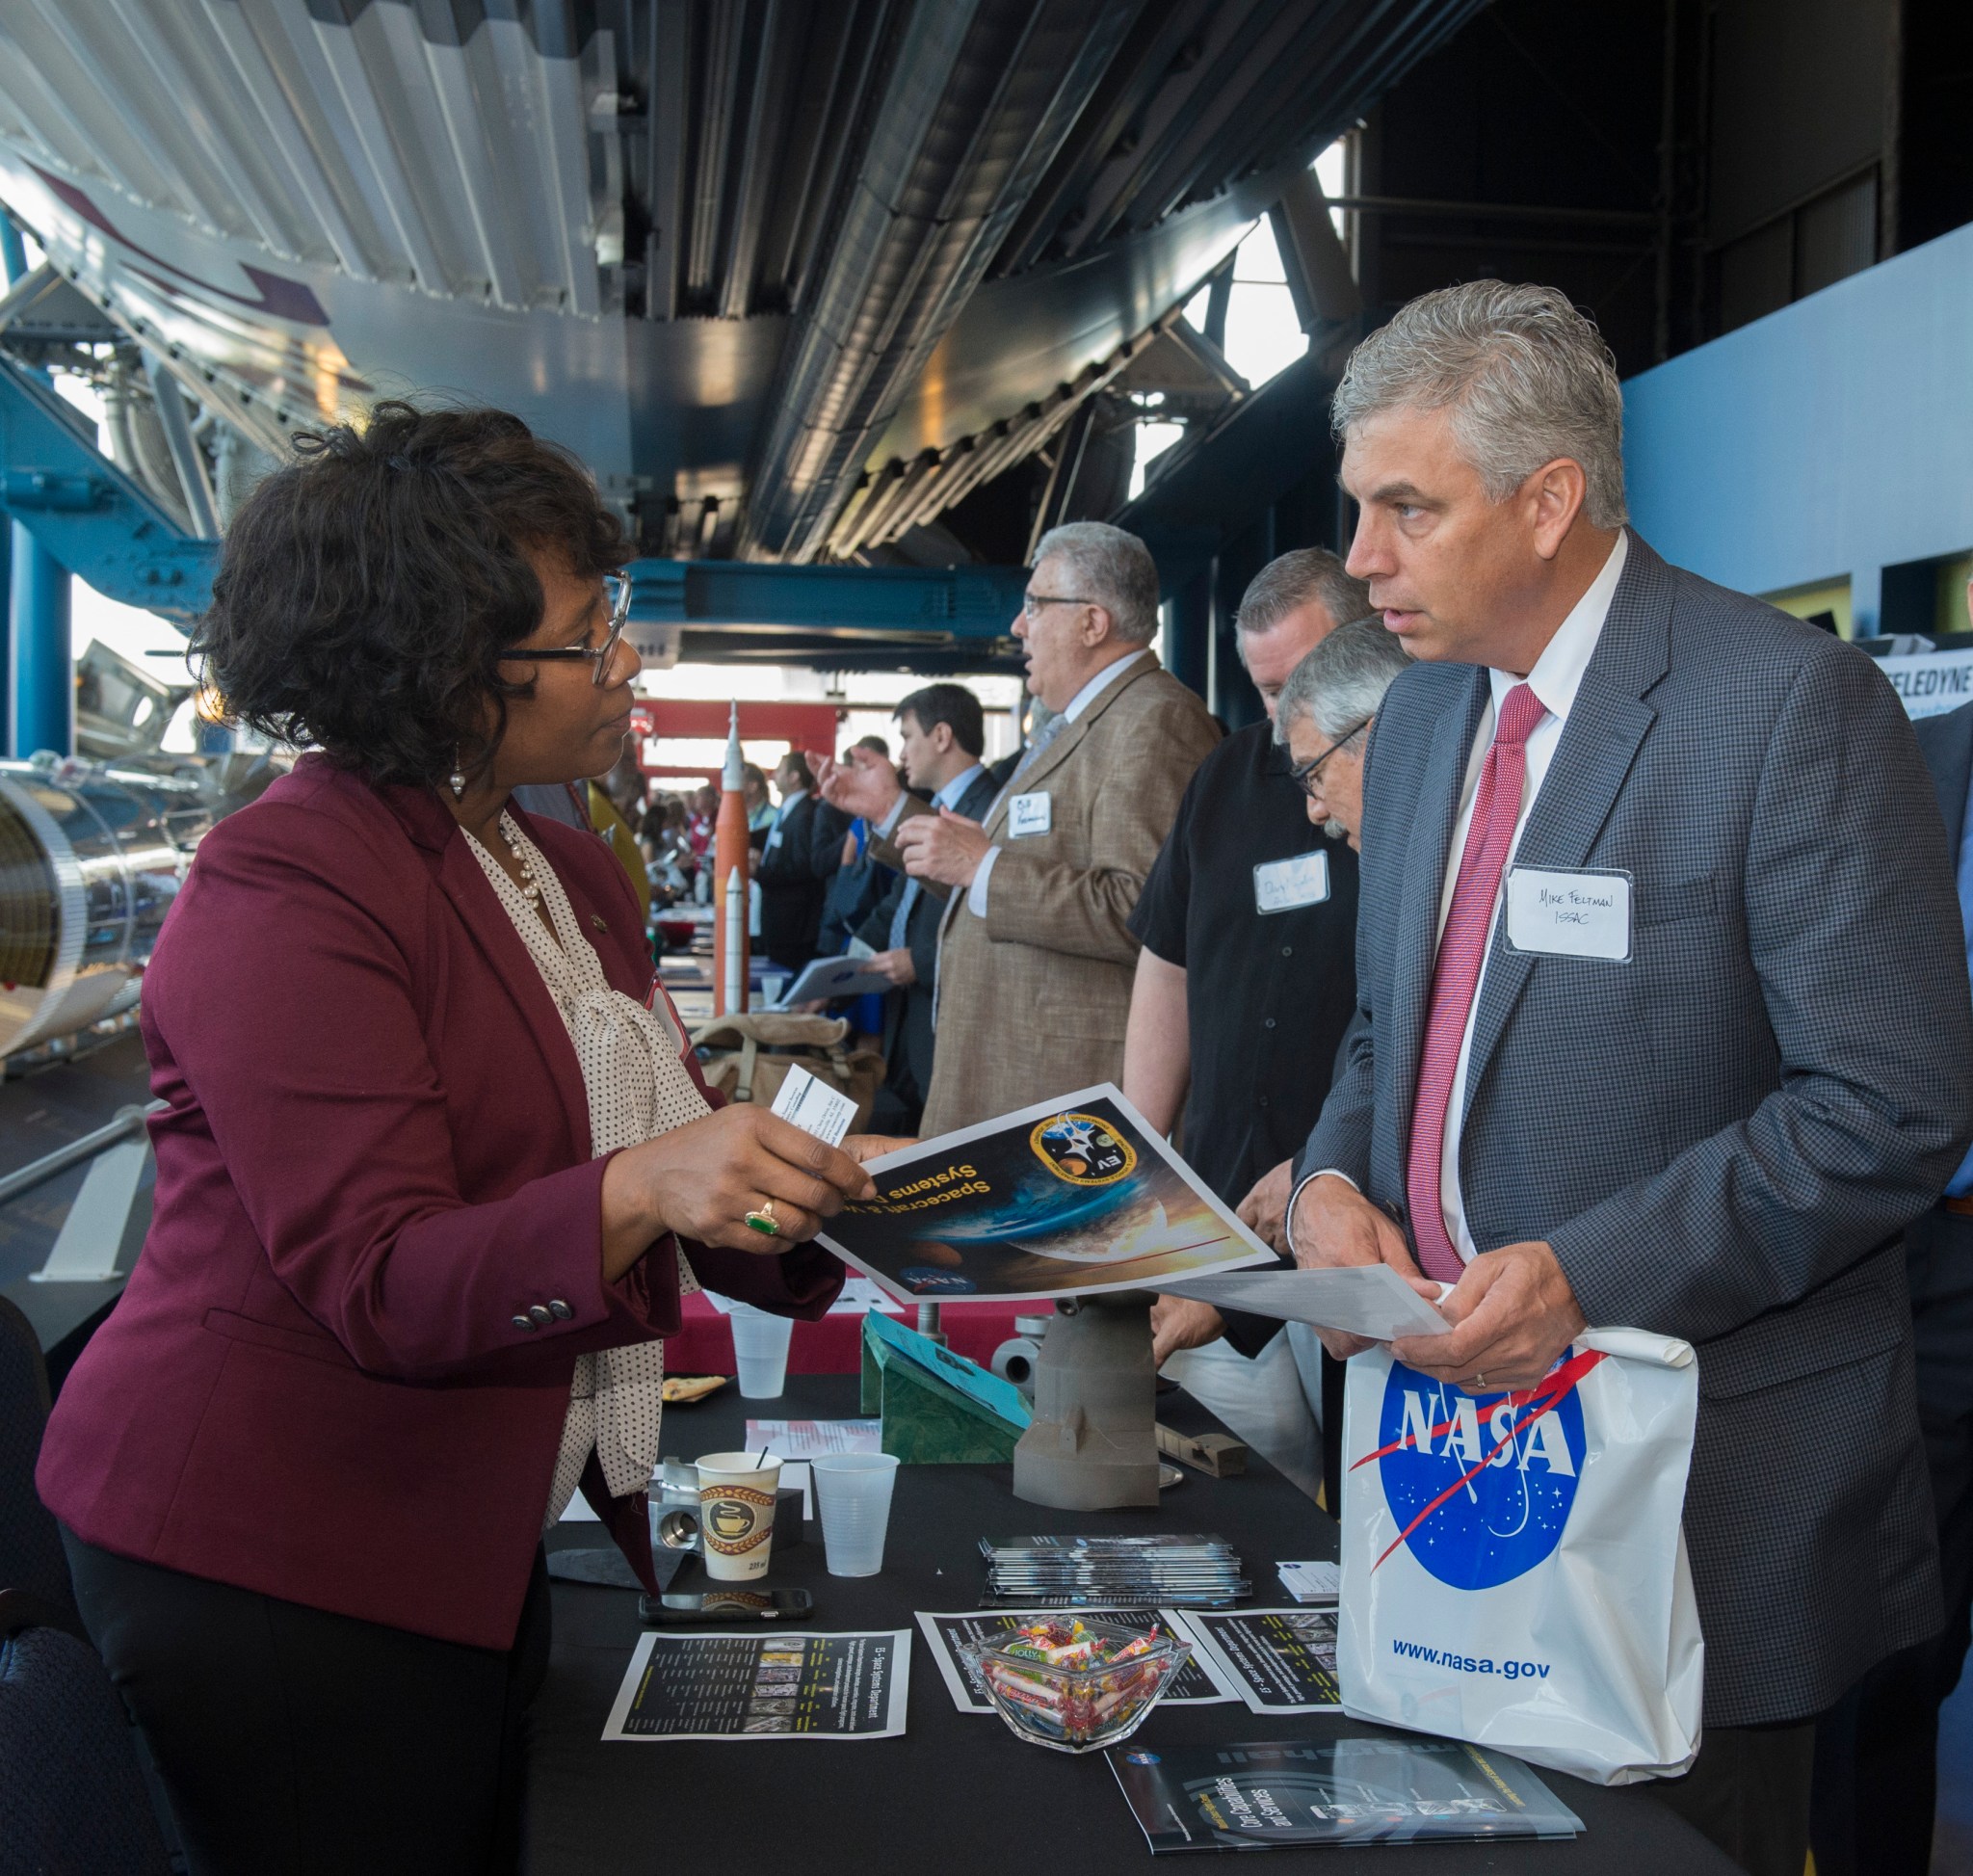 NASA Marshall team member Nadra Hatchett, left, shares information about 3D printing and propulsion research underway at NASA.